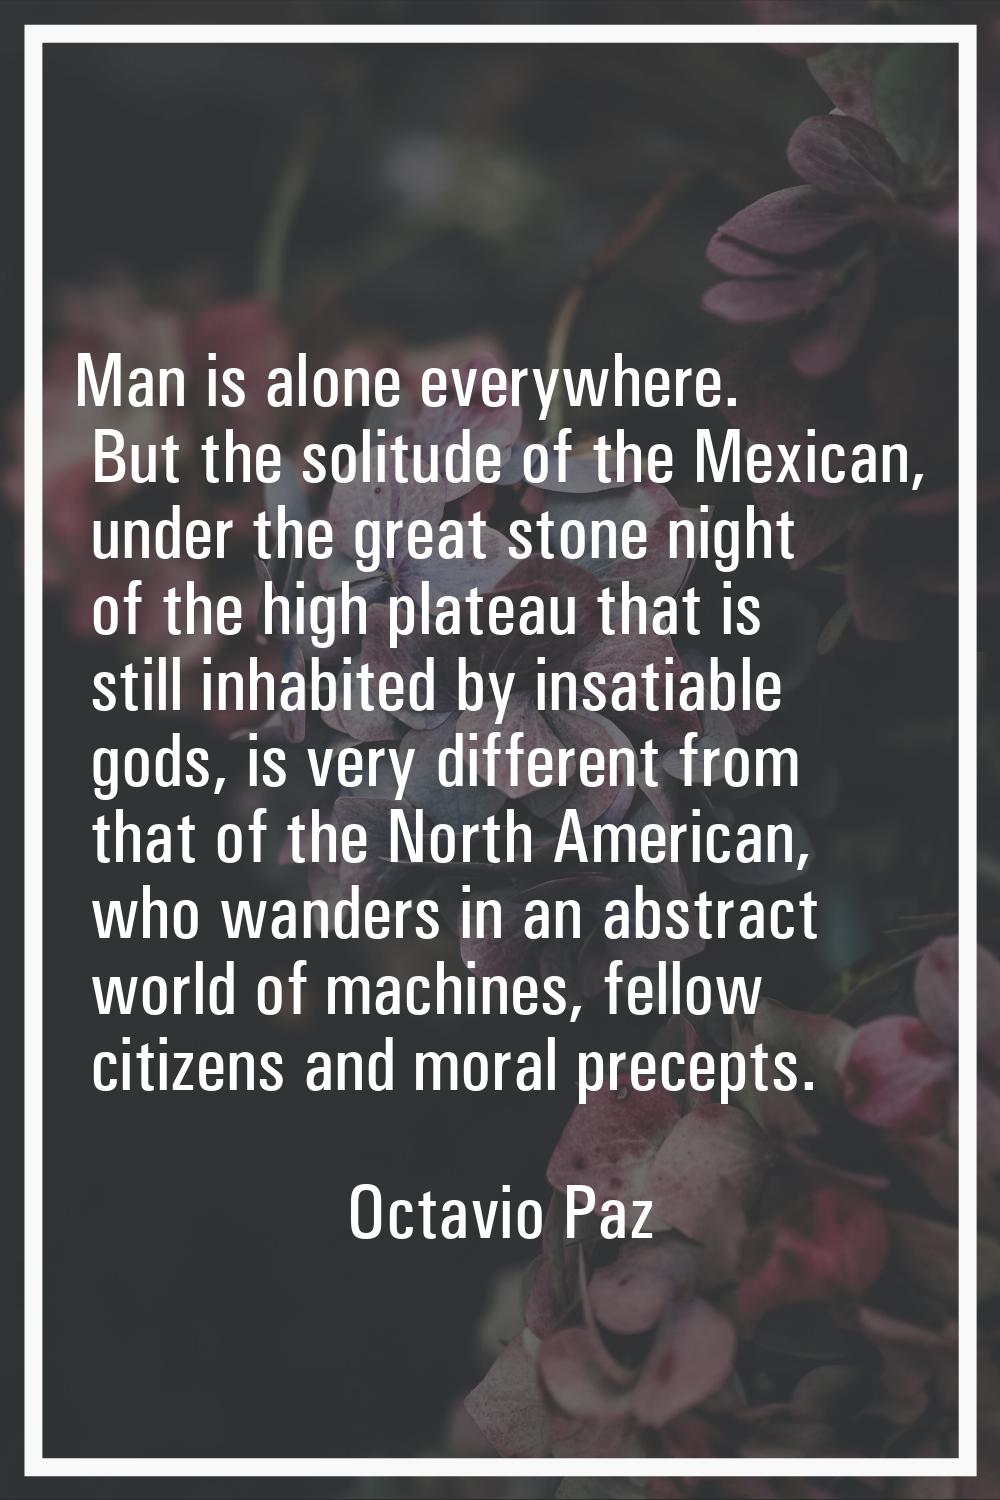 Man is alone everywhere. But the solitude of the Mexican, under the great stone night of the high p